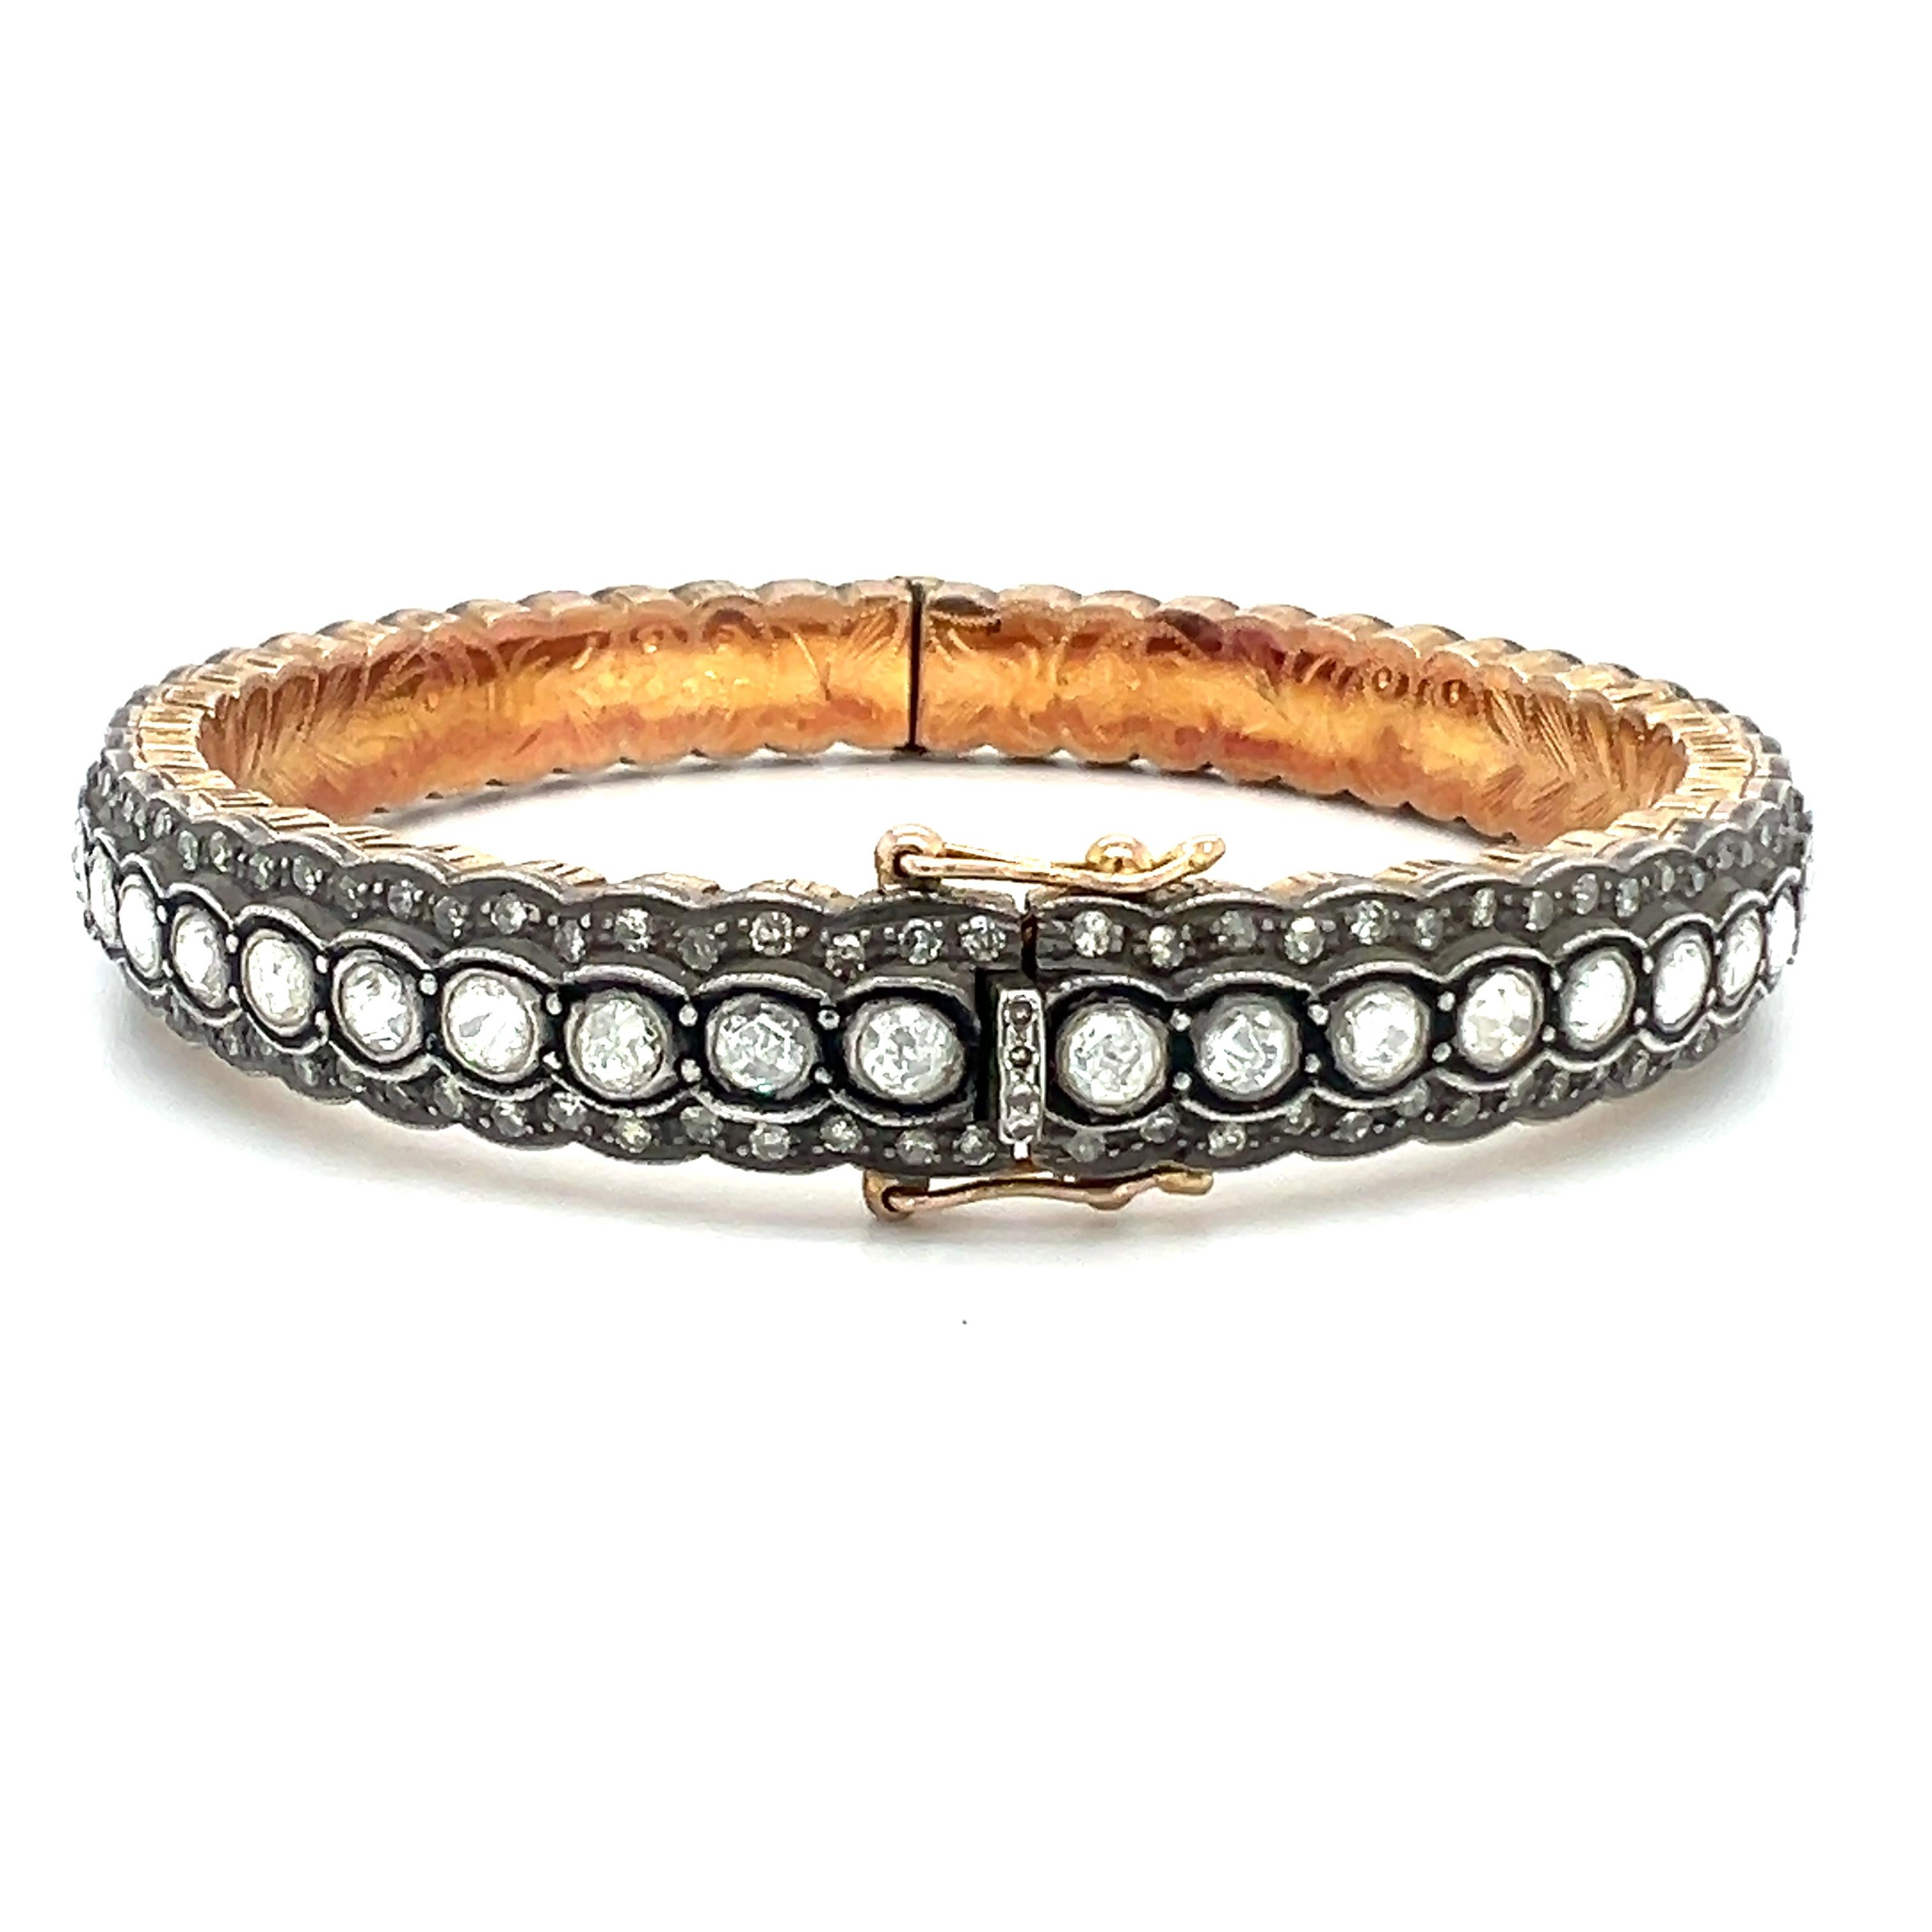 A beautiful solid sterling silver bangle feature with 7.20-carat natural diamonds. 